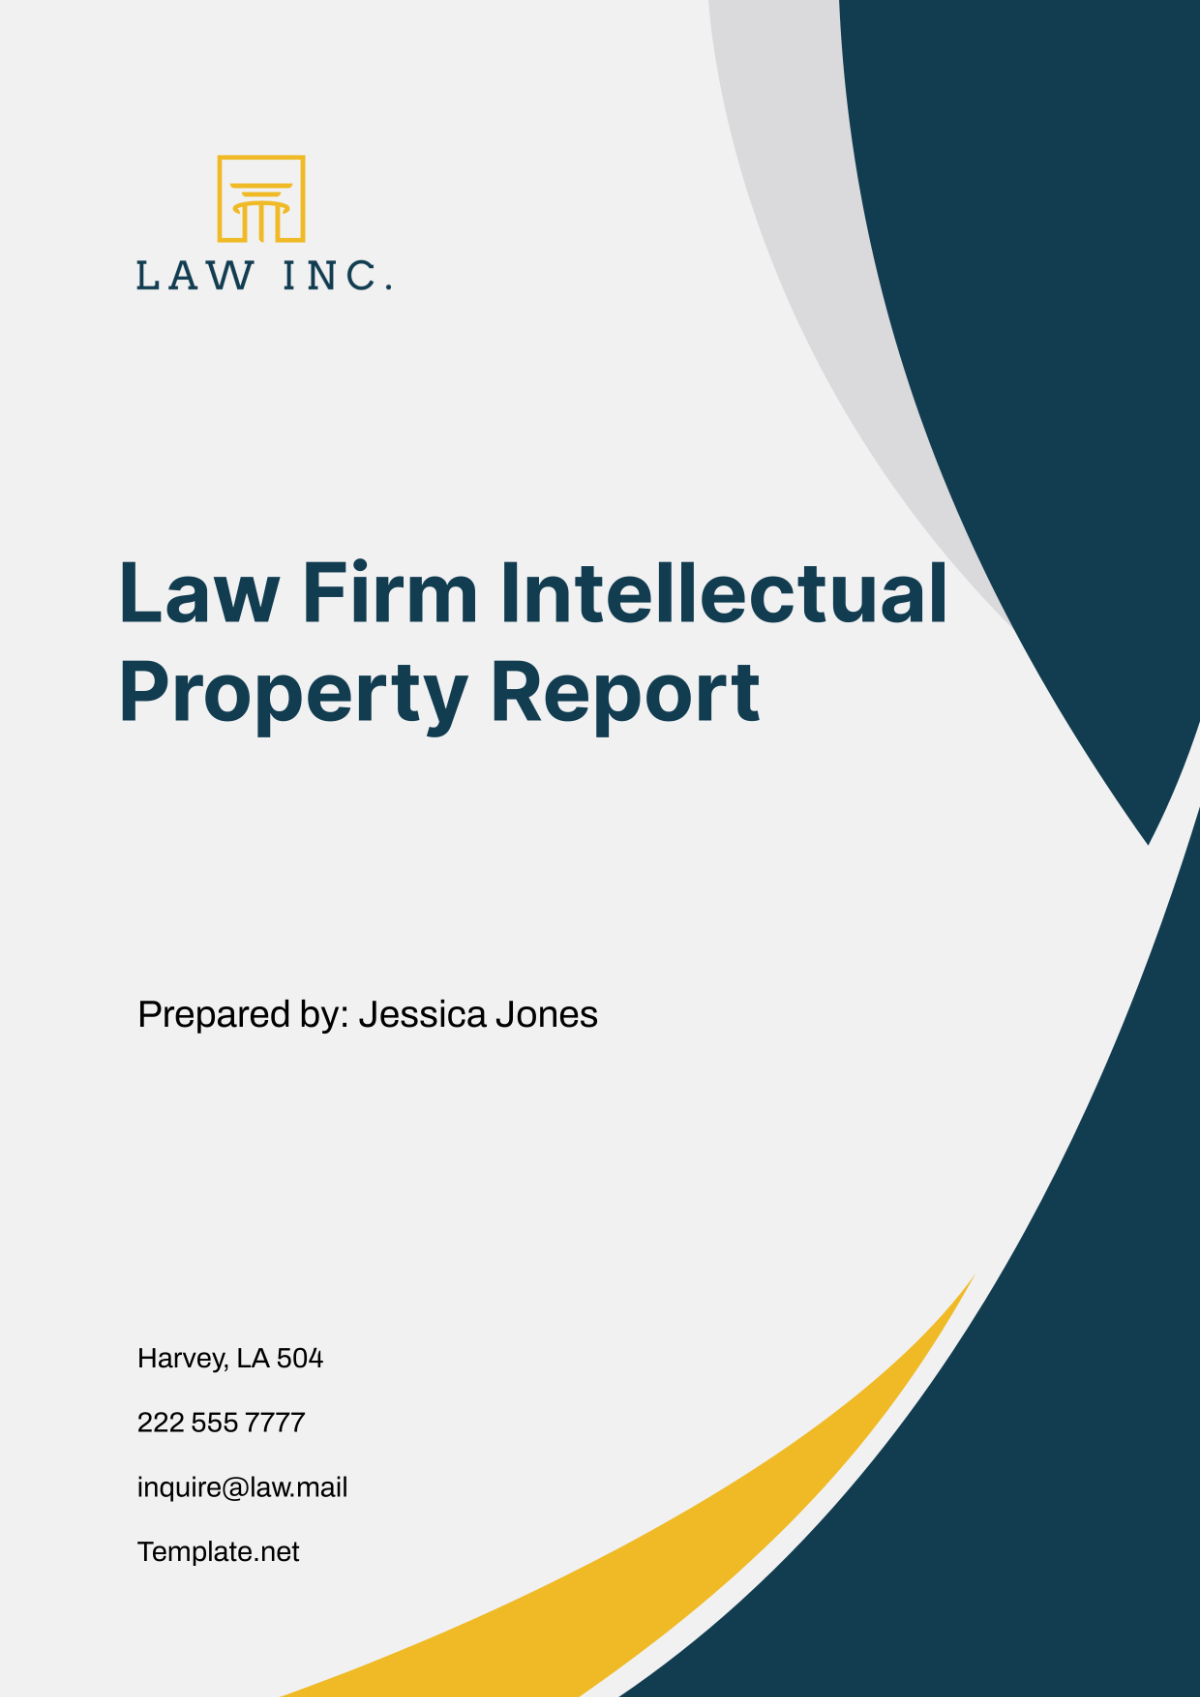 Law Firm Intellectual Property Report Template